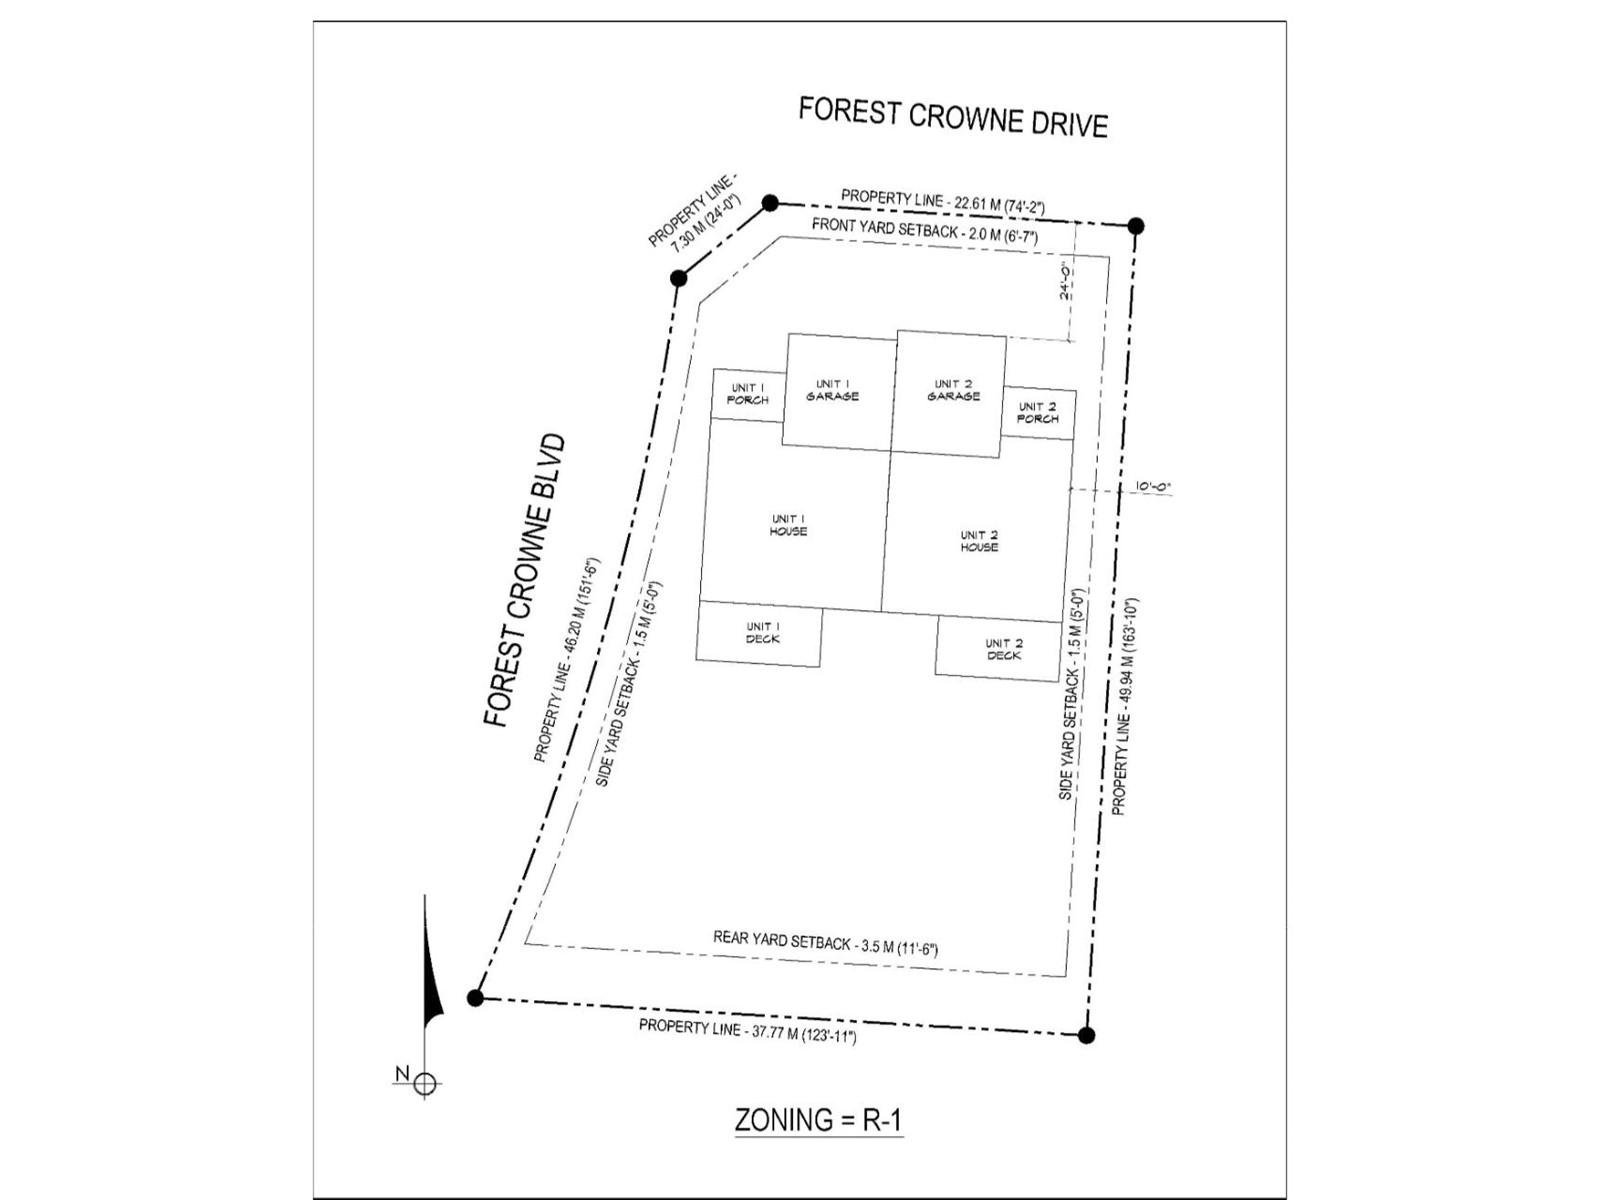 












Proposed 1 - 501 FOREST CROWNE DRIVE

,
Kimberley,




British Columbia
V1A0A4

